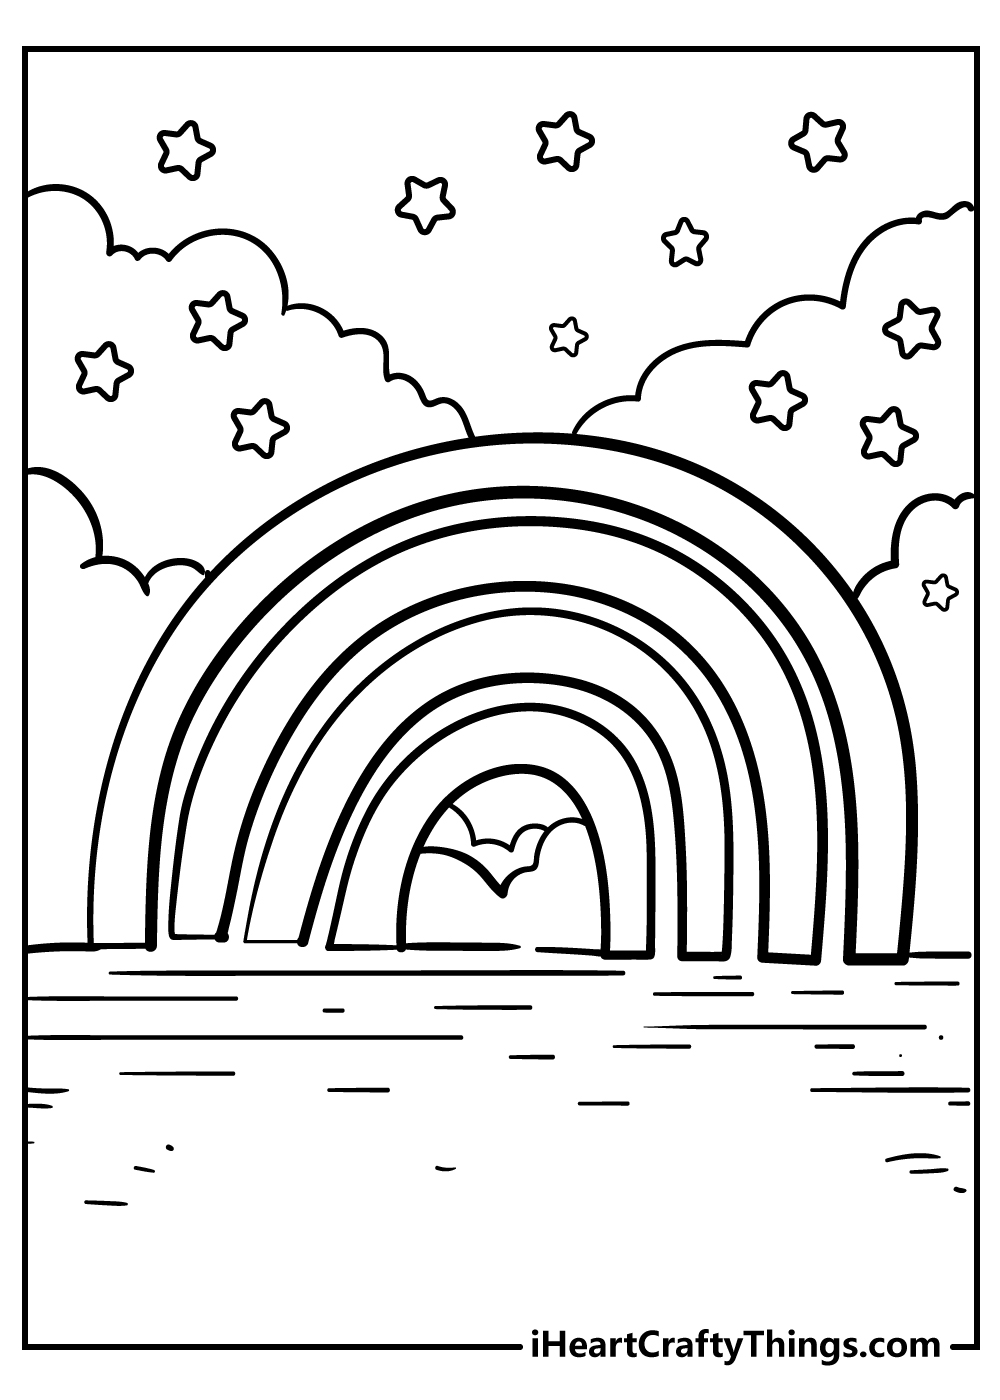 Rainbow coloring pages free printables